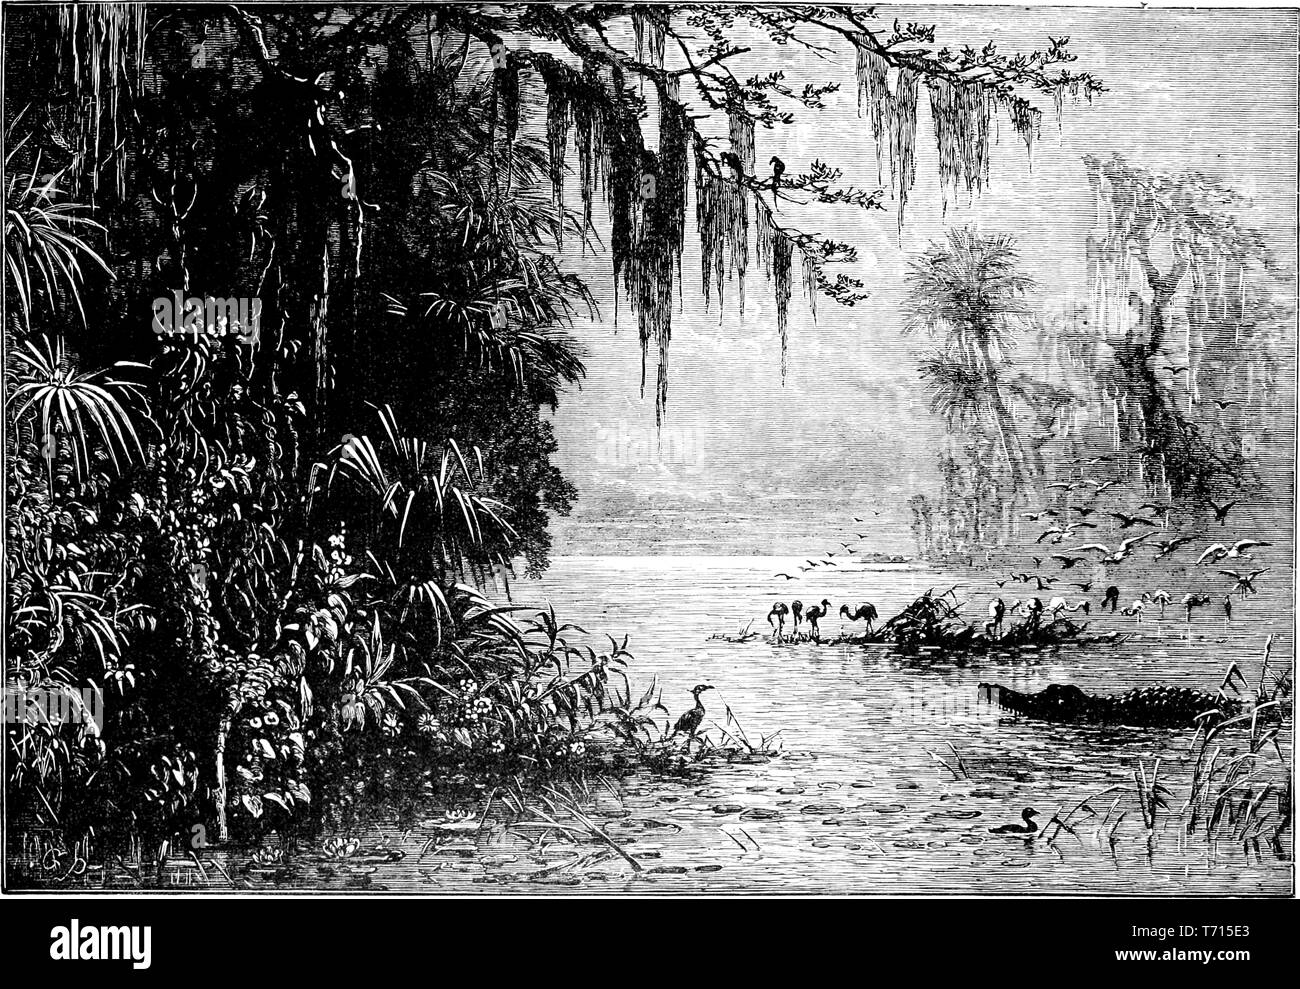 Engraving of the land of Seminole Indians, from the book 'A popular history of the United States of America, from the aboriginal times to the present day' by John Clark Ridpath, 1893. Courtesy Internet Archive. () Stock Photo